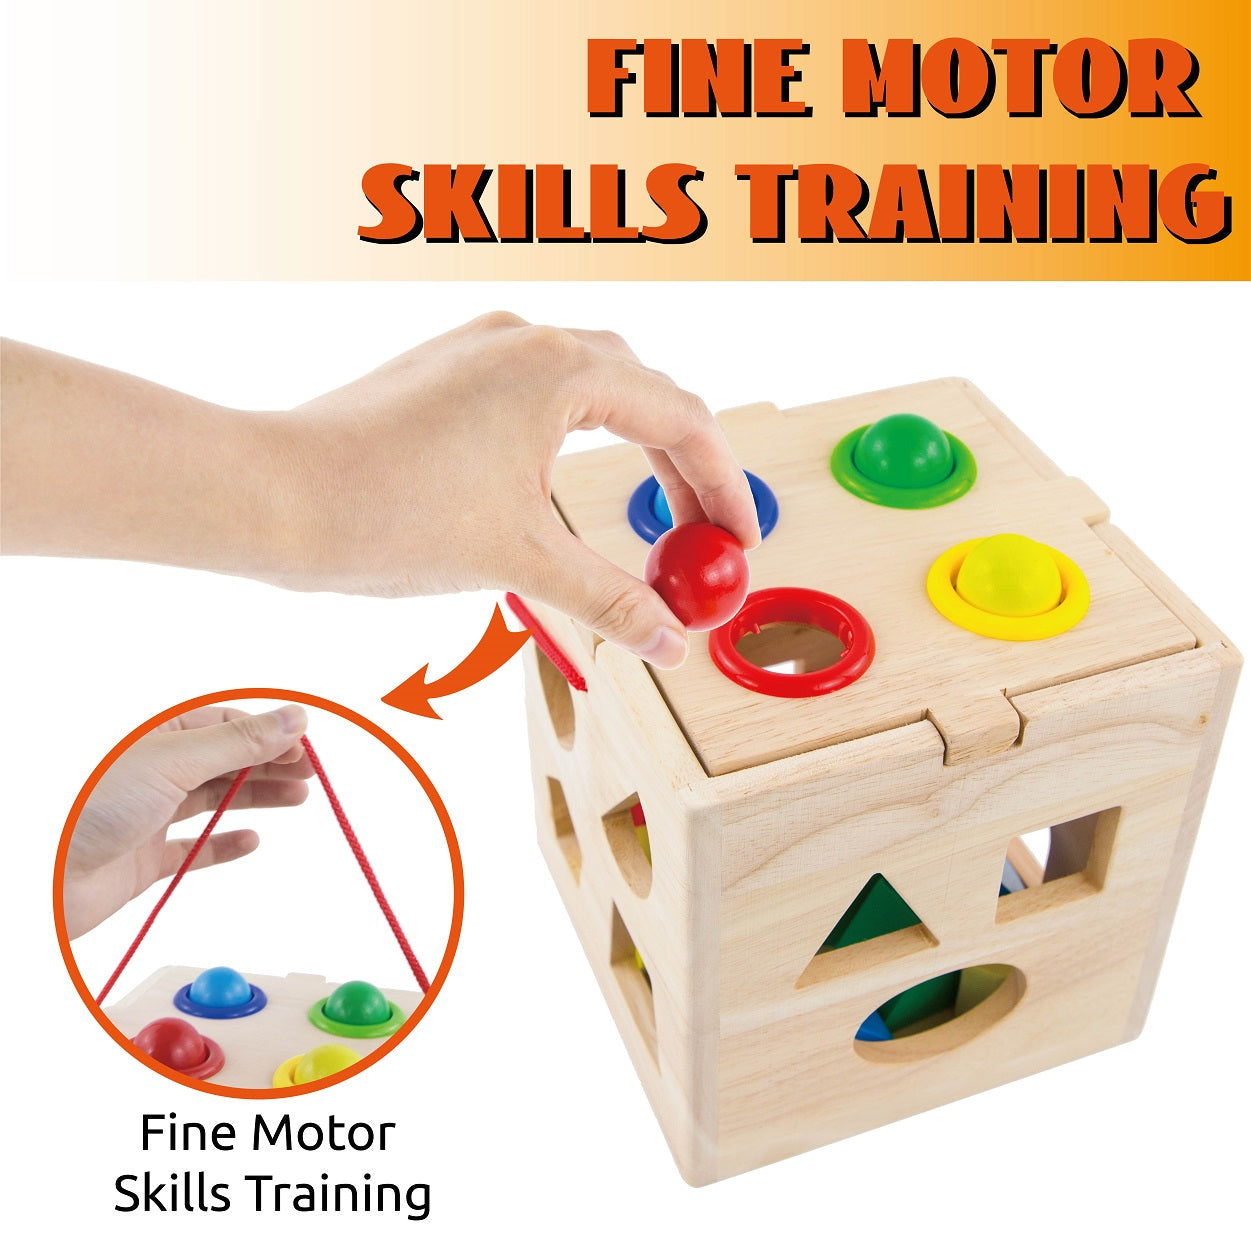 Wooden Activity Cube - Shapes and Blocks